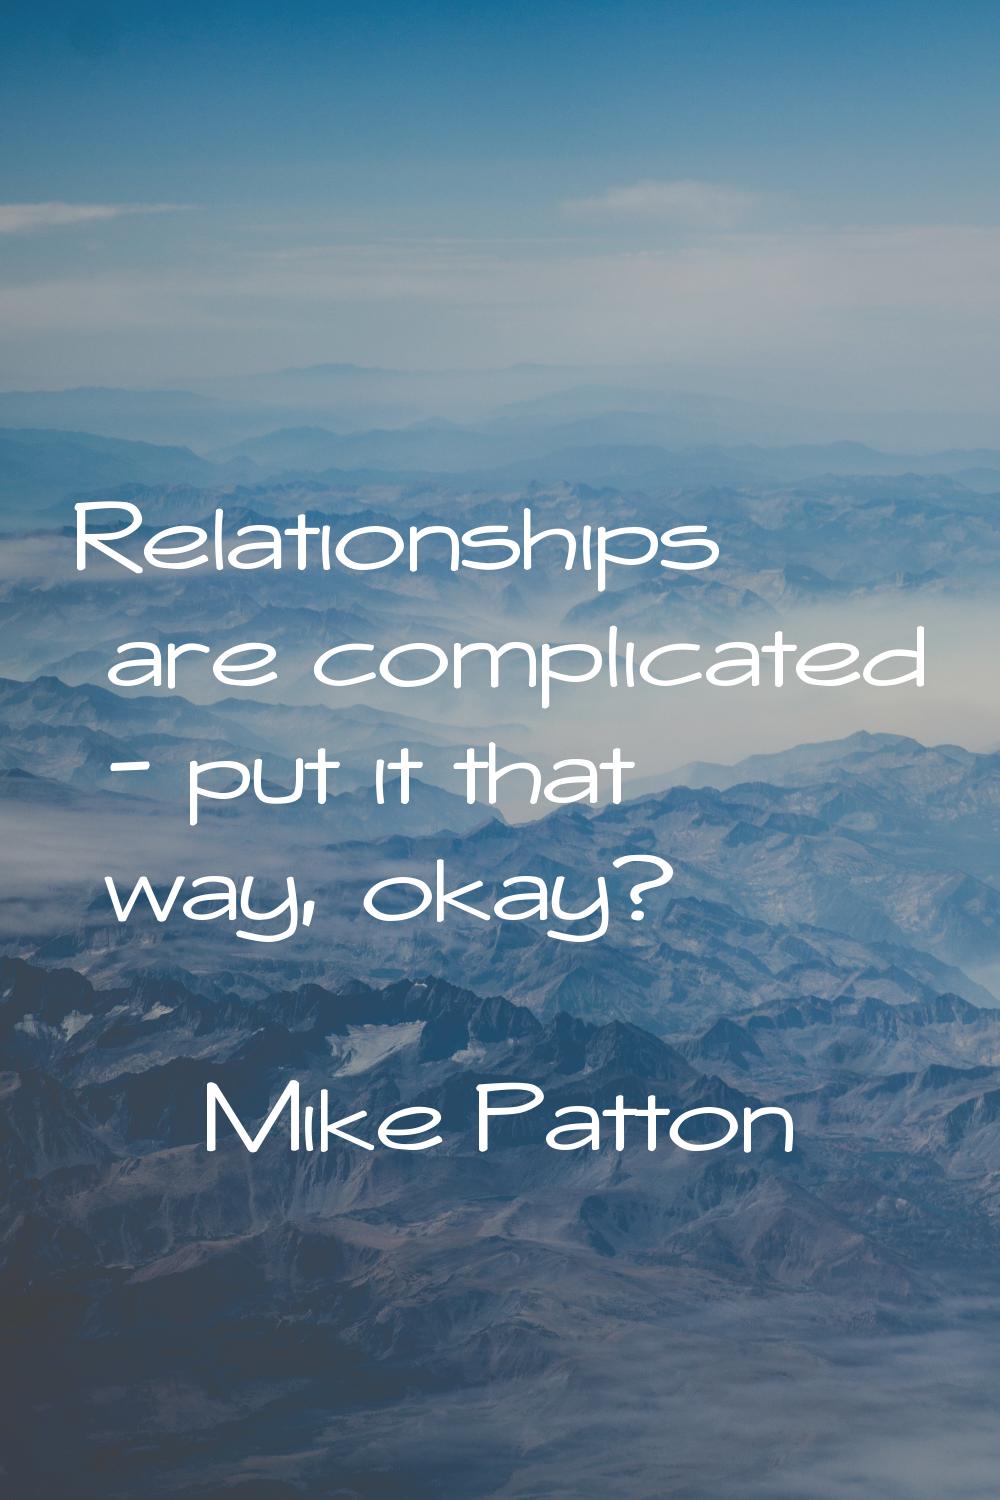 Relationships are complicated - put it that way, okay?